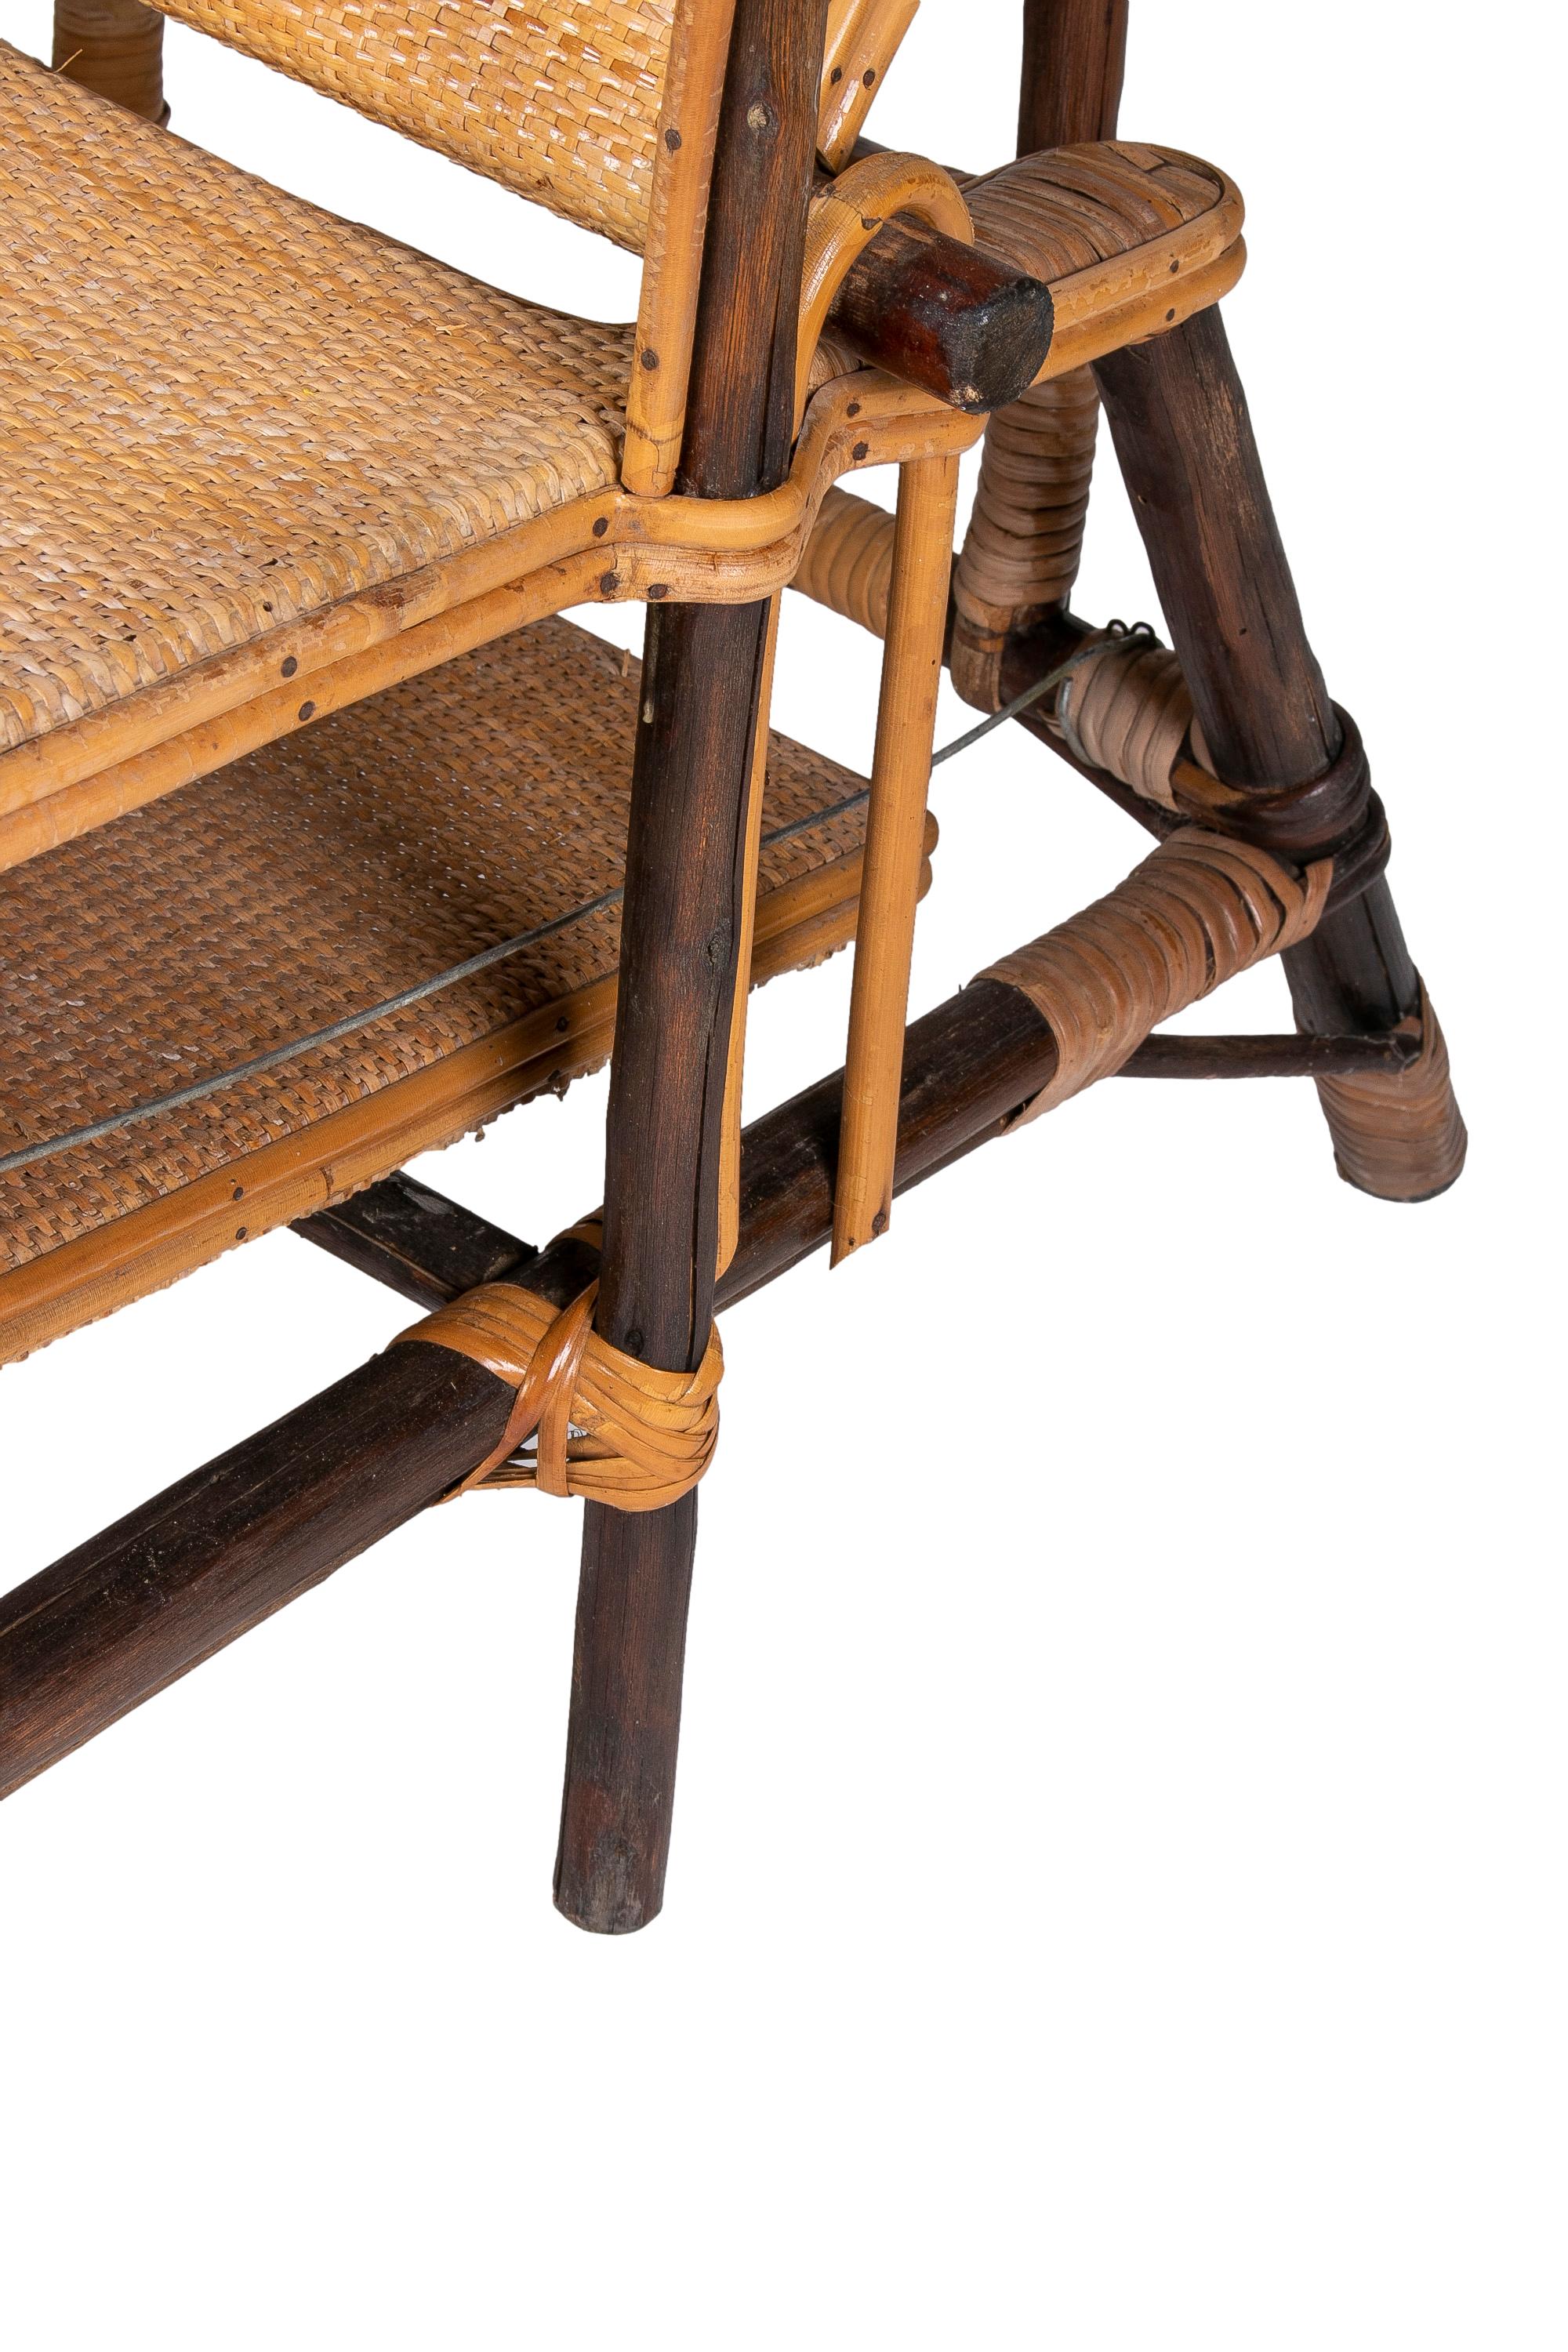 1980s Spanish Woven Wicker & Bamboo Sunbathing Lounge Chair For Sale 9